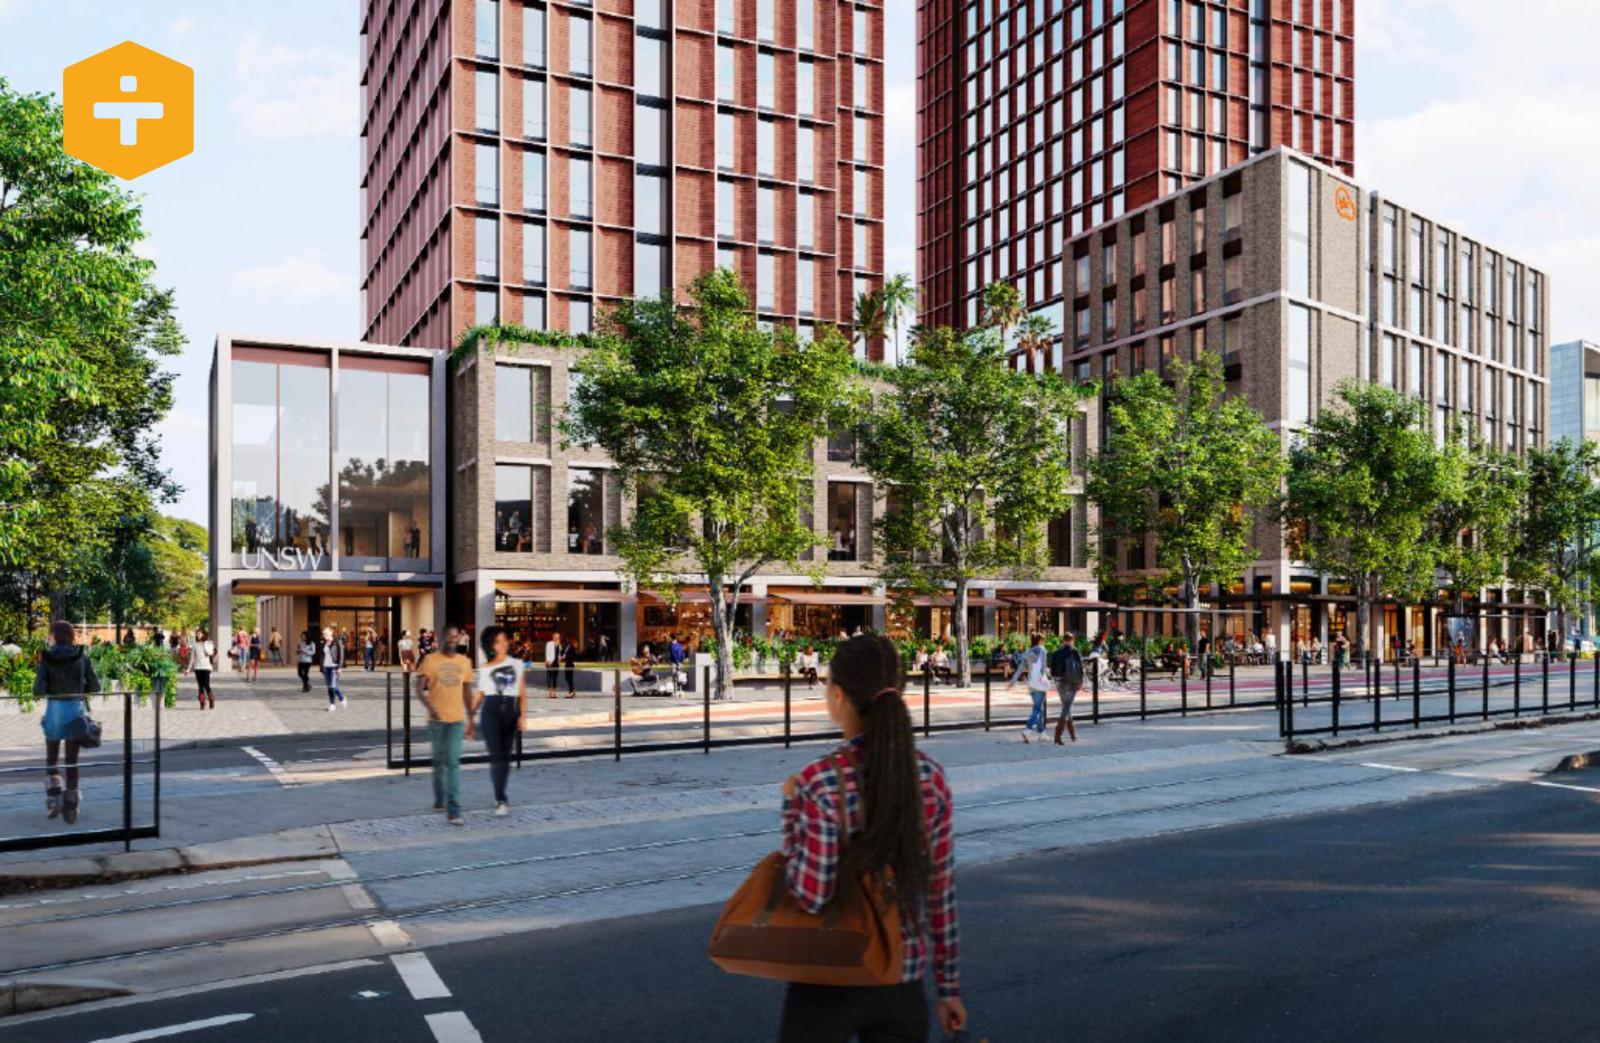 Bates Smart's design for the five buildings that are part of Iglu and the University of New South Wales' purpose-built student accommodation project.